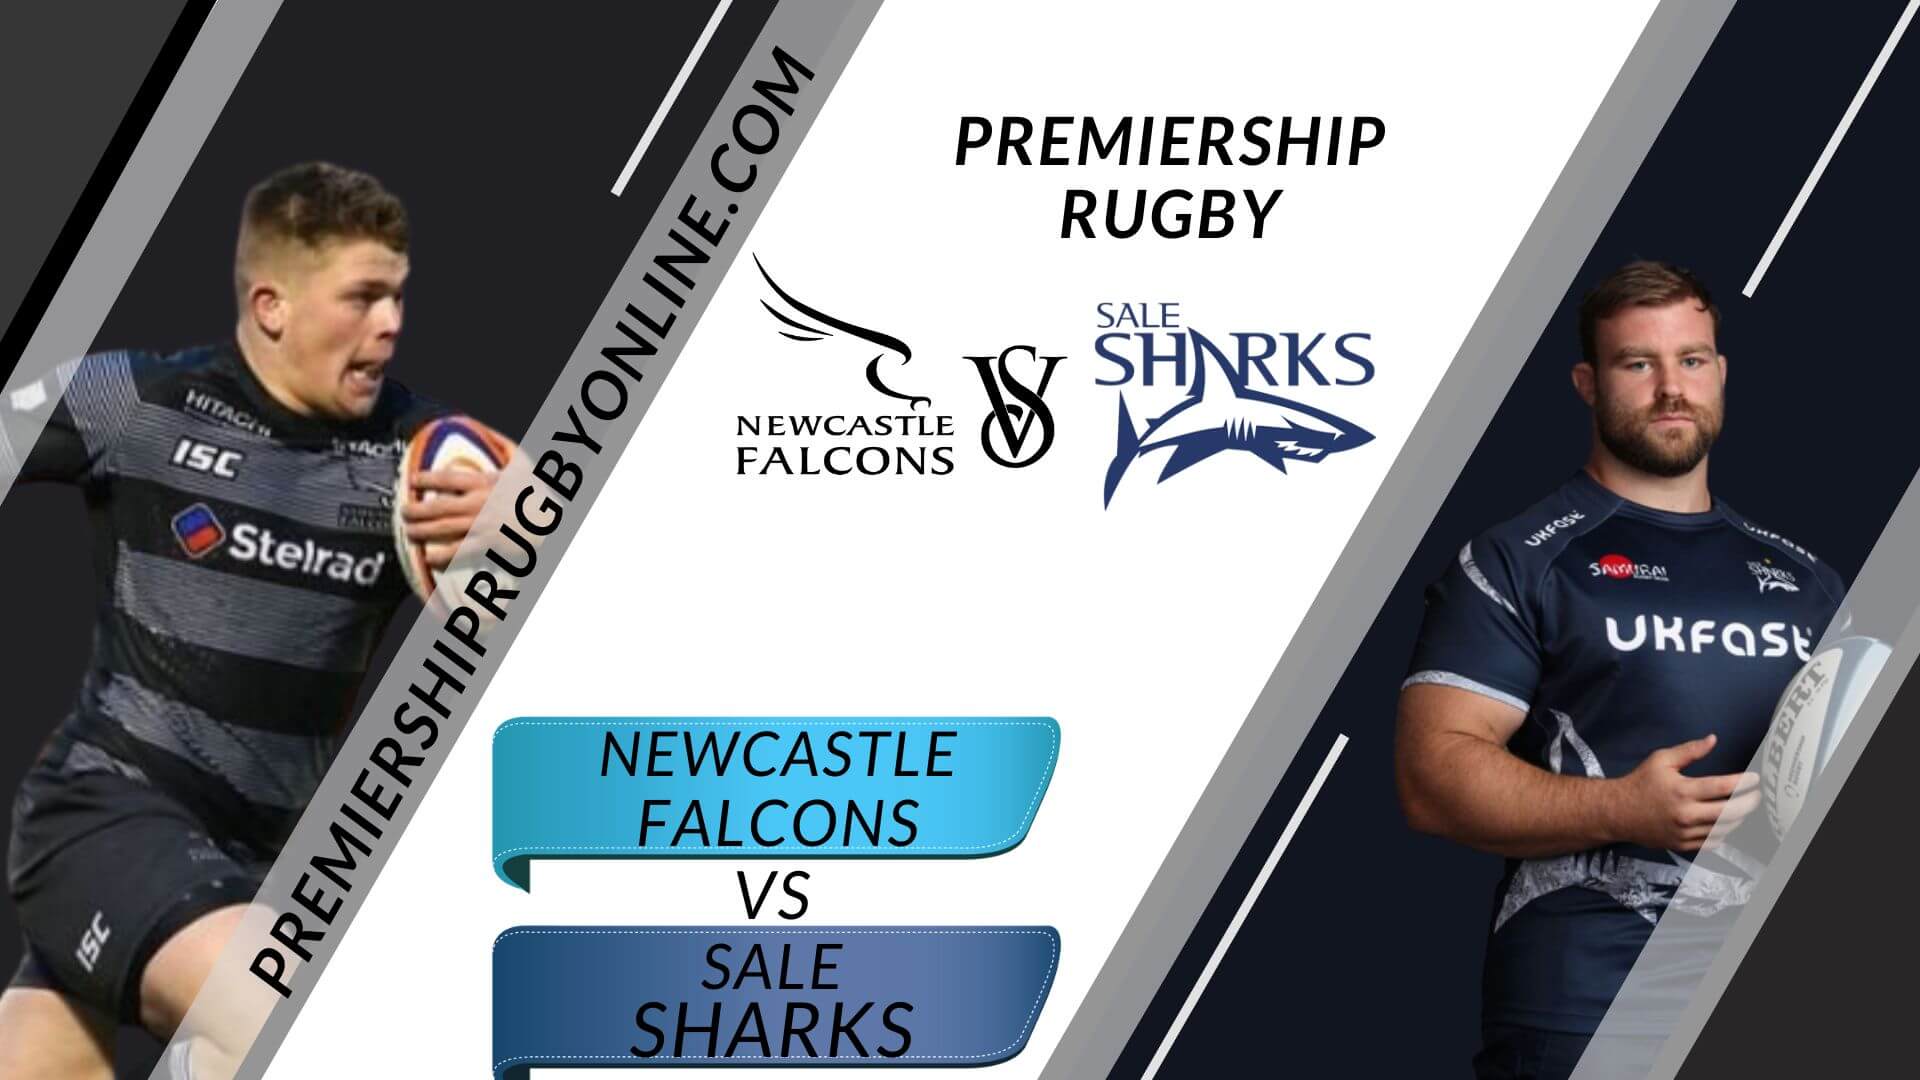 Newcastle Falcons Vs Sale Sharks Live Stream 2022-23 | Premiership Rugby Round 13 slider